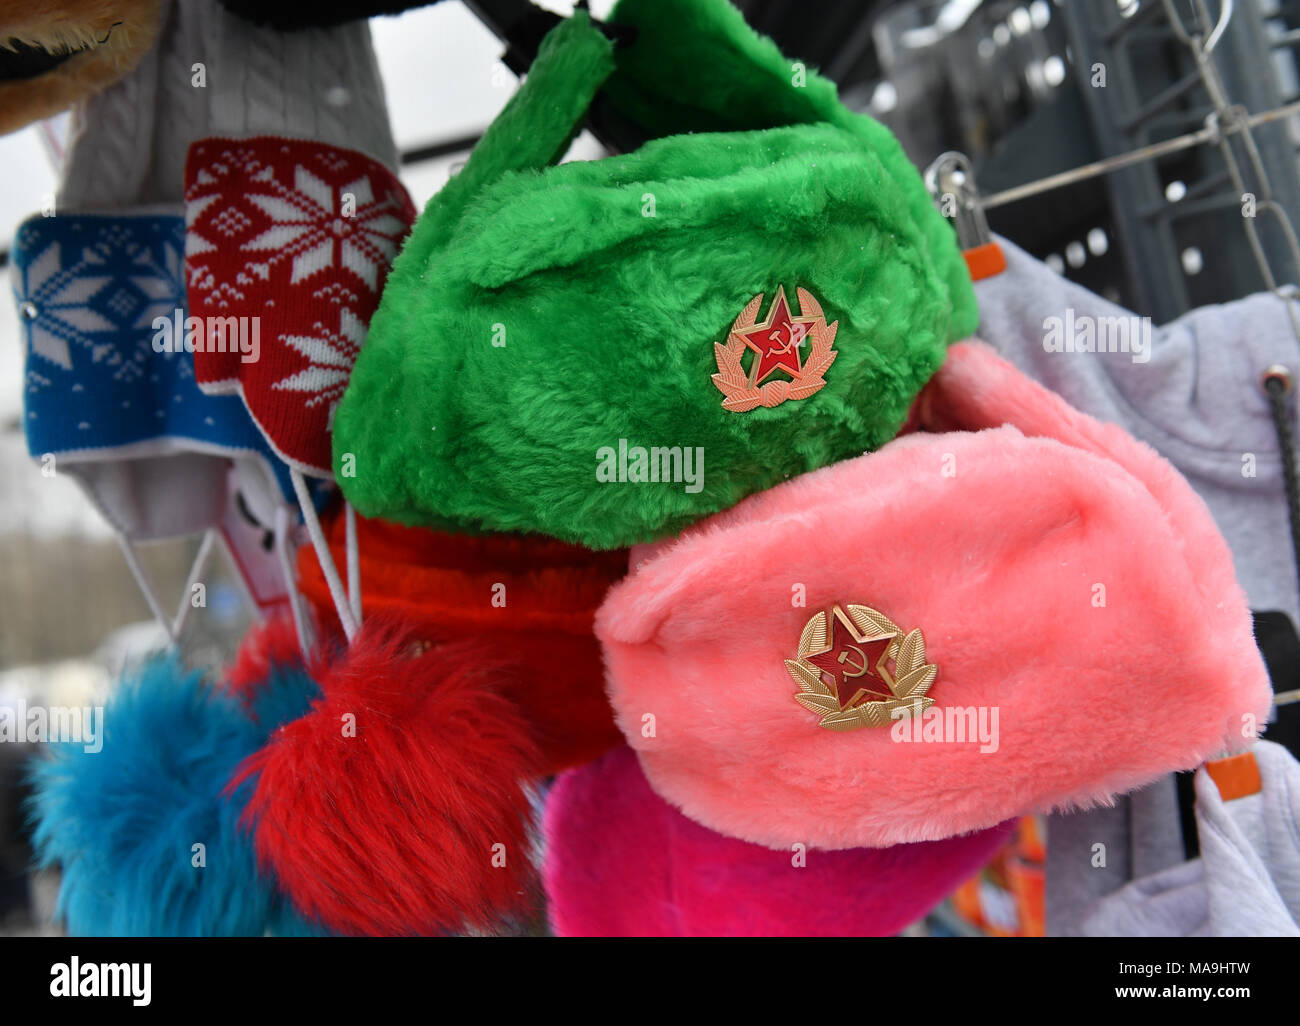 15 March 2018, Russia, St. Petersburg: A pink and a green czapka with the Soviet emblem hanging in a souvenir stand in St. Petersburg. Photo: Hendrik Schmidt/dpa-Zentralbild/ZB Stock Photo